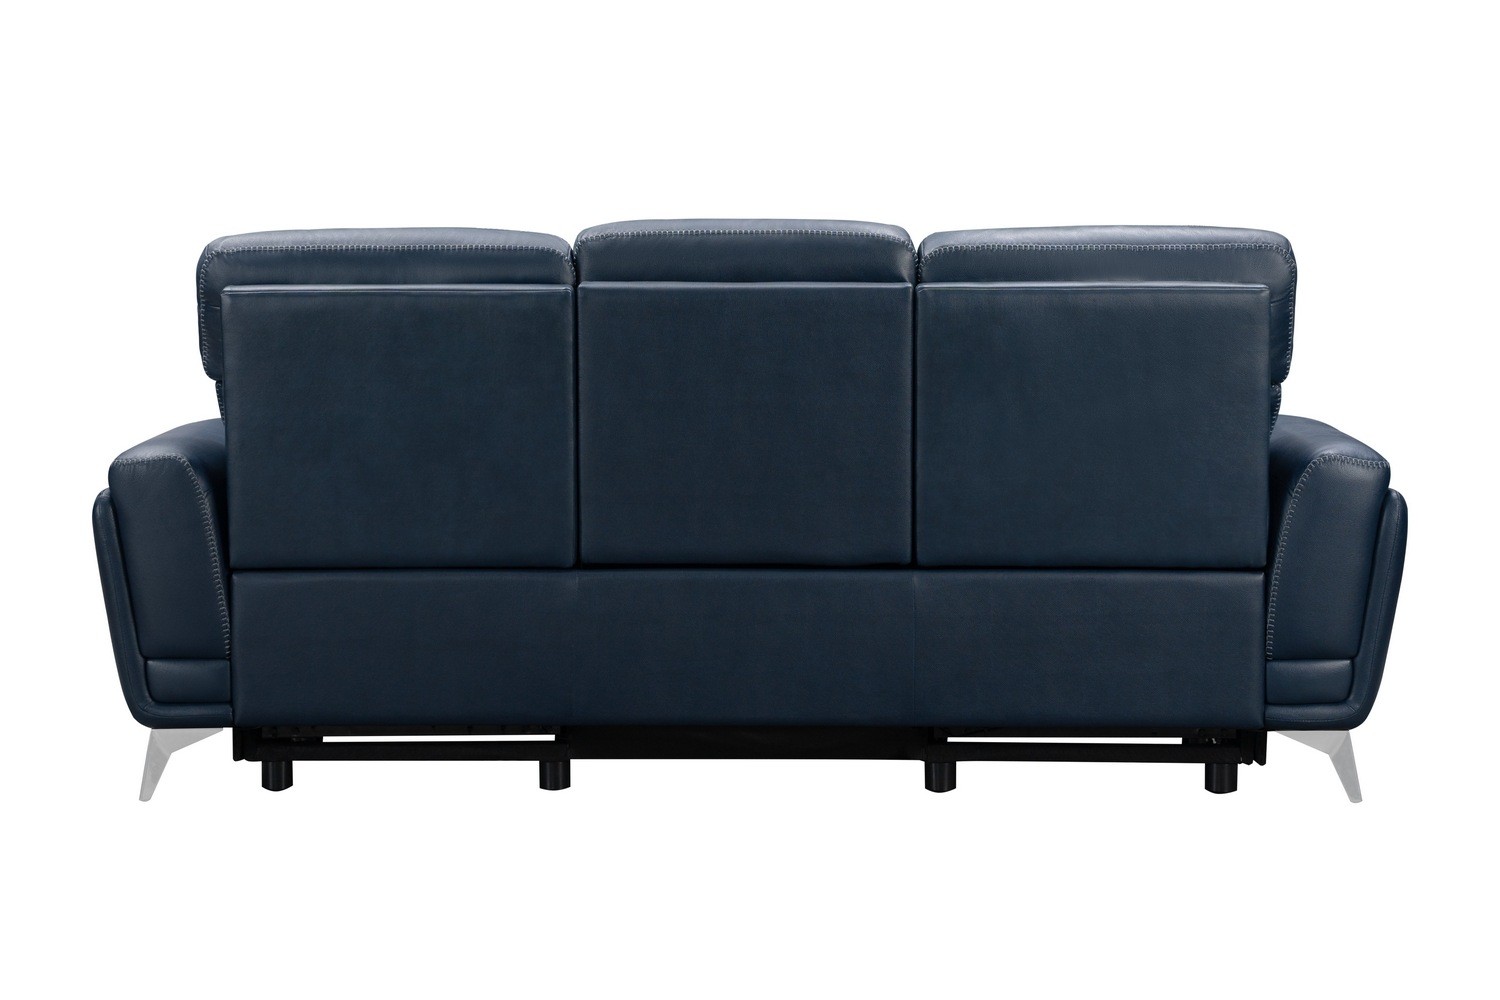 Barcalounger Cameron Power Reclining Sofa with Power Head Rests - Marco Navy Blue/Leather Match